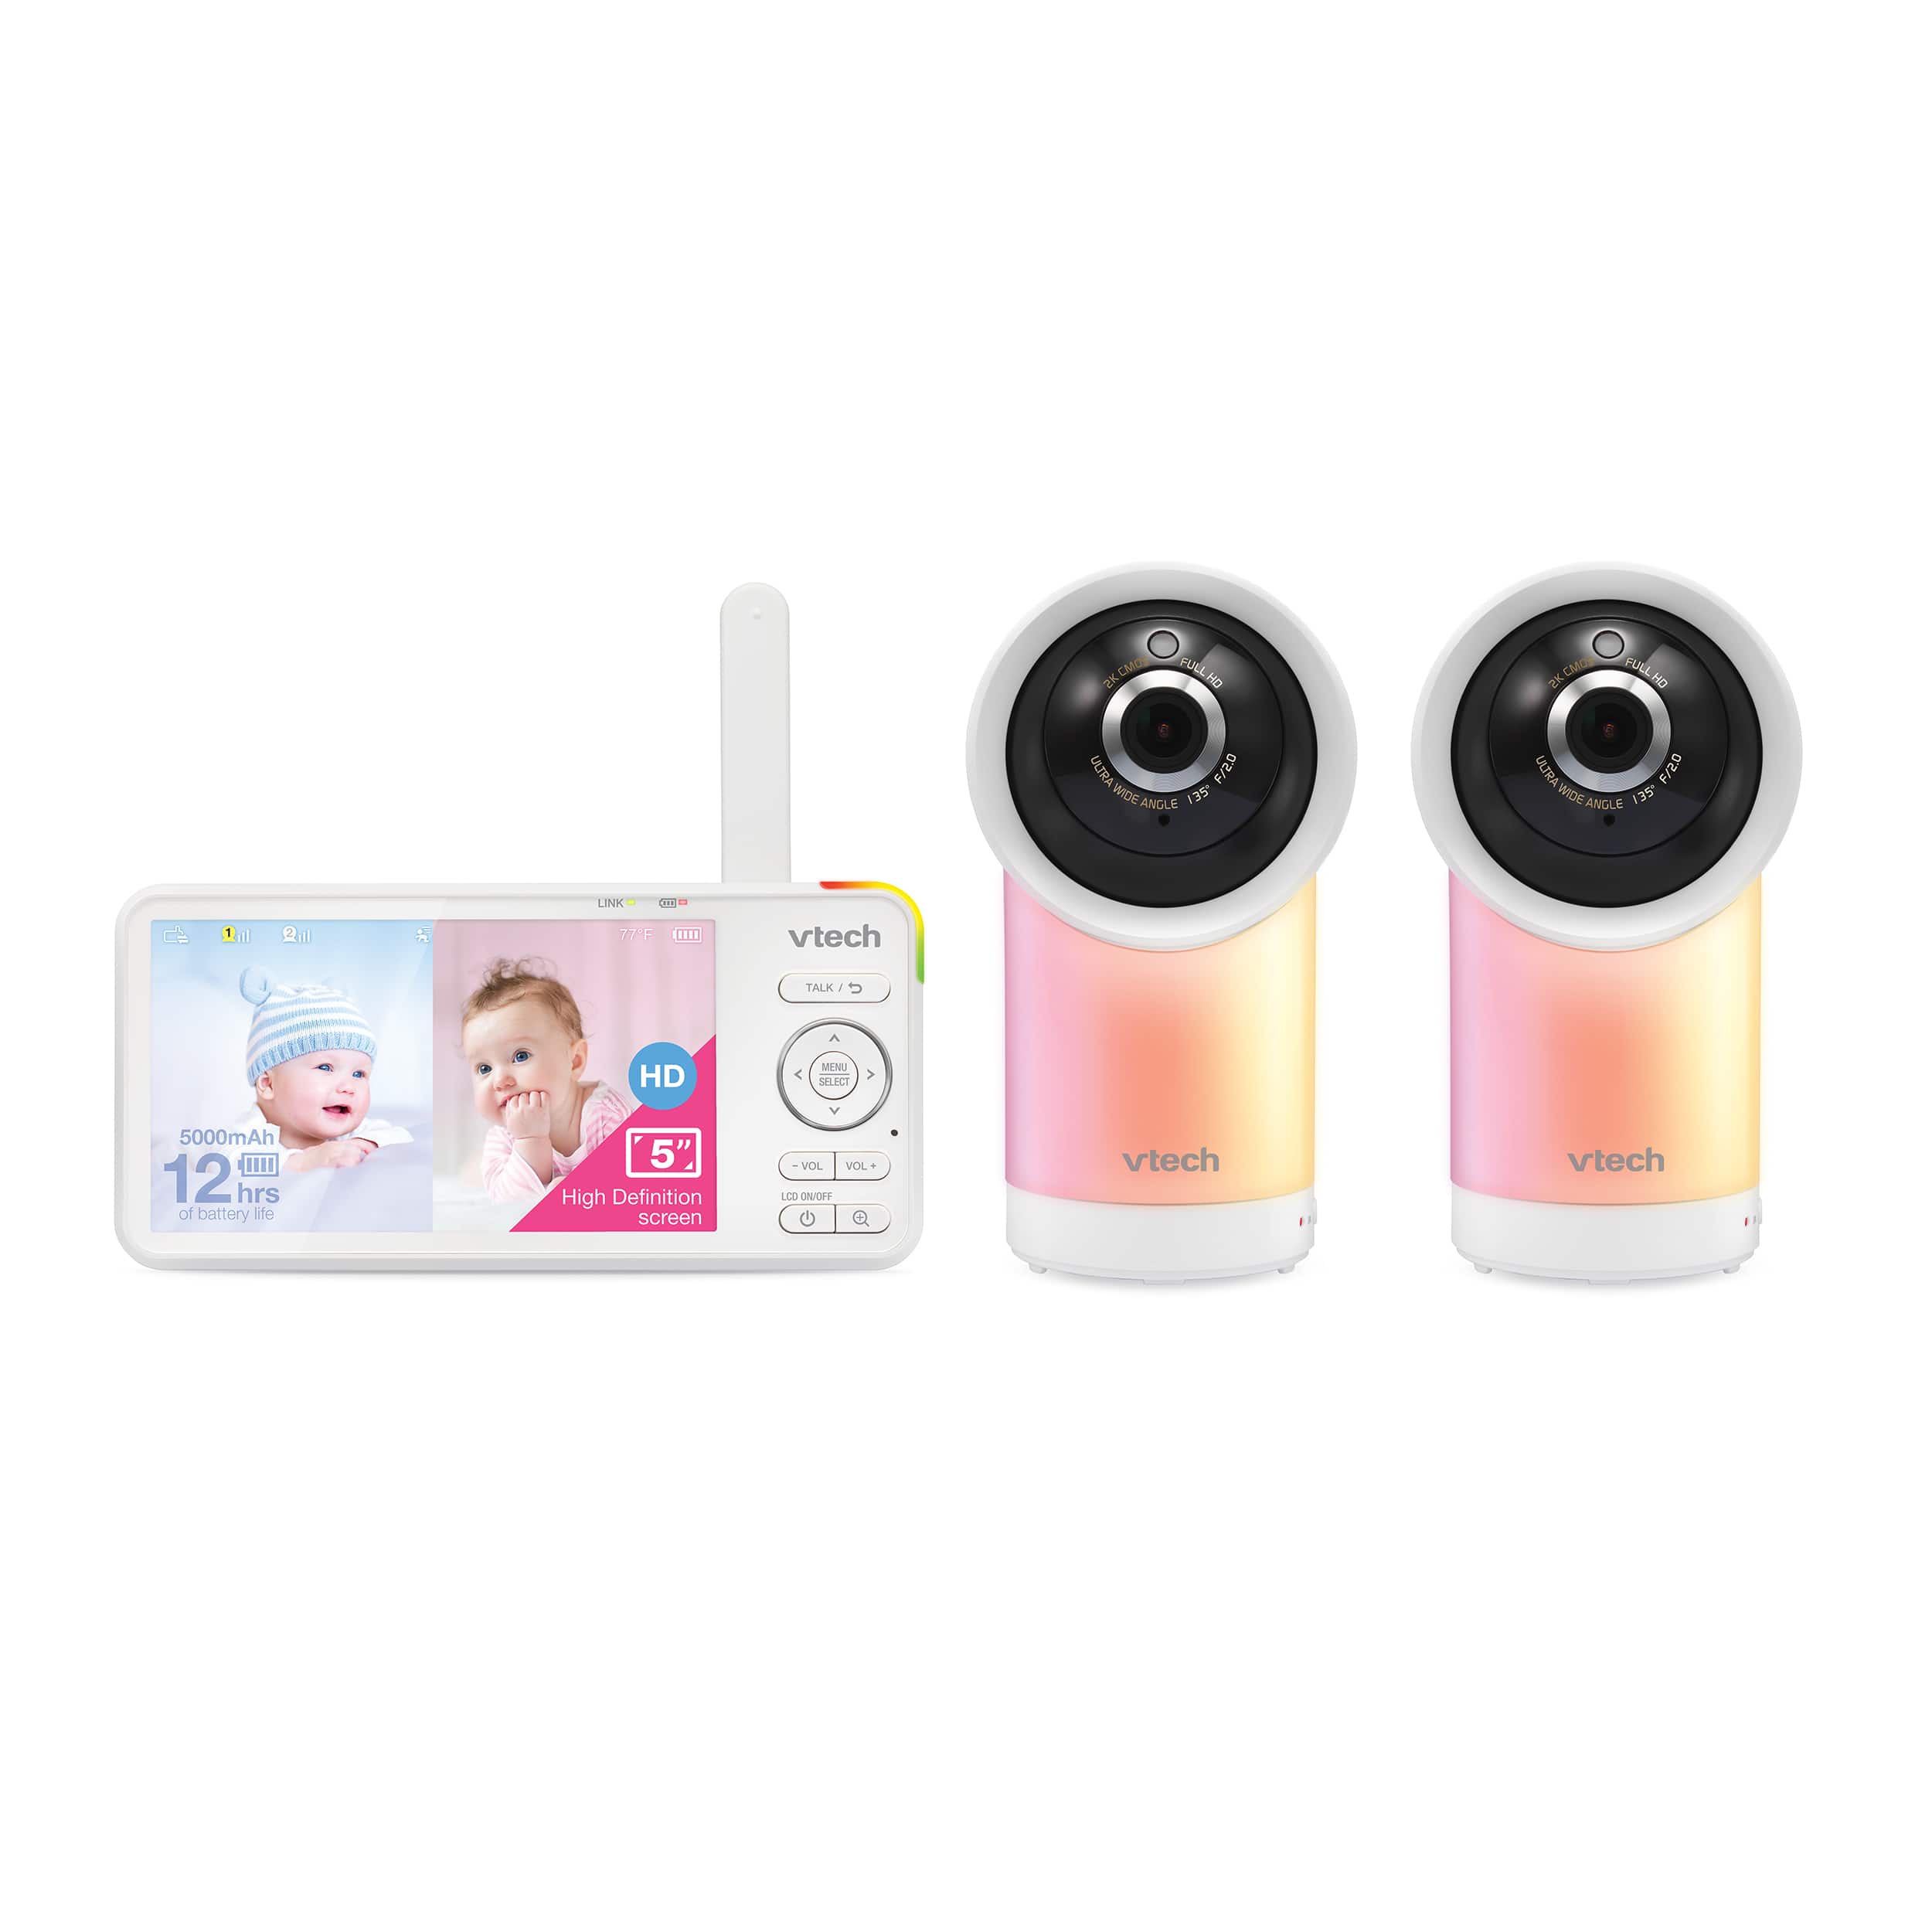 2 Camera 1080p Smart WiFi Remote Access 360 Degree Pan & Tilt Video Baby Monitor with 5" High Definition 720p Display, Night Light